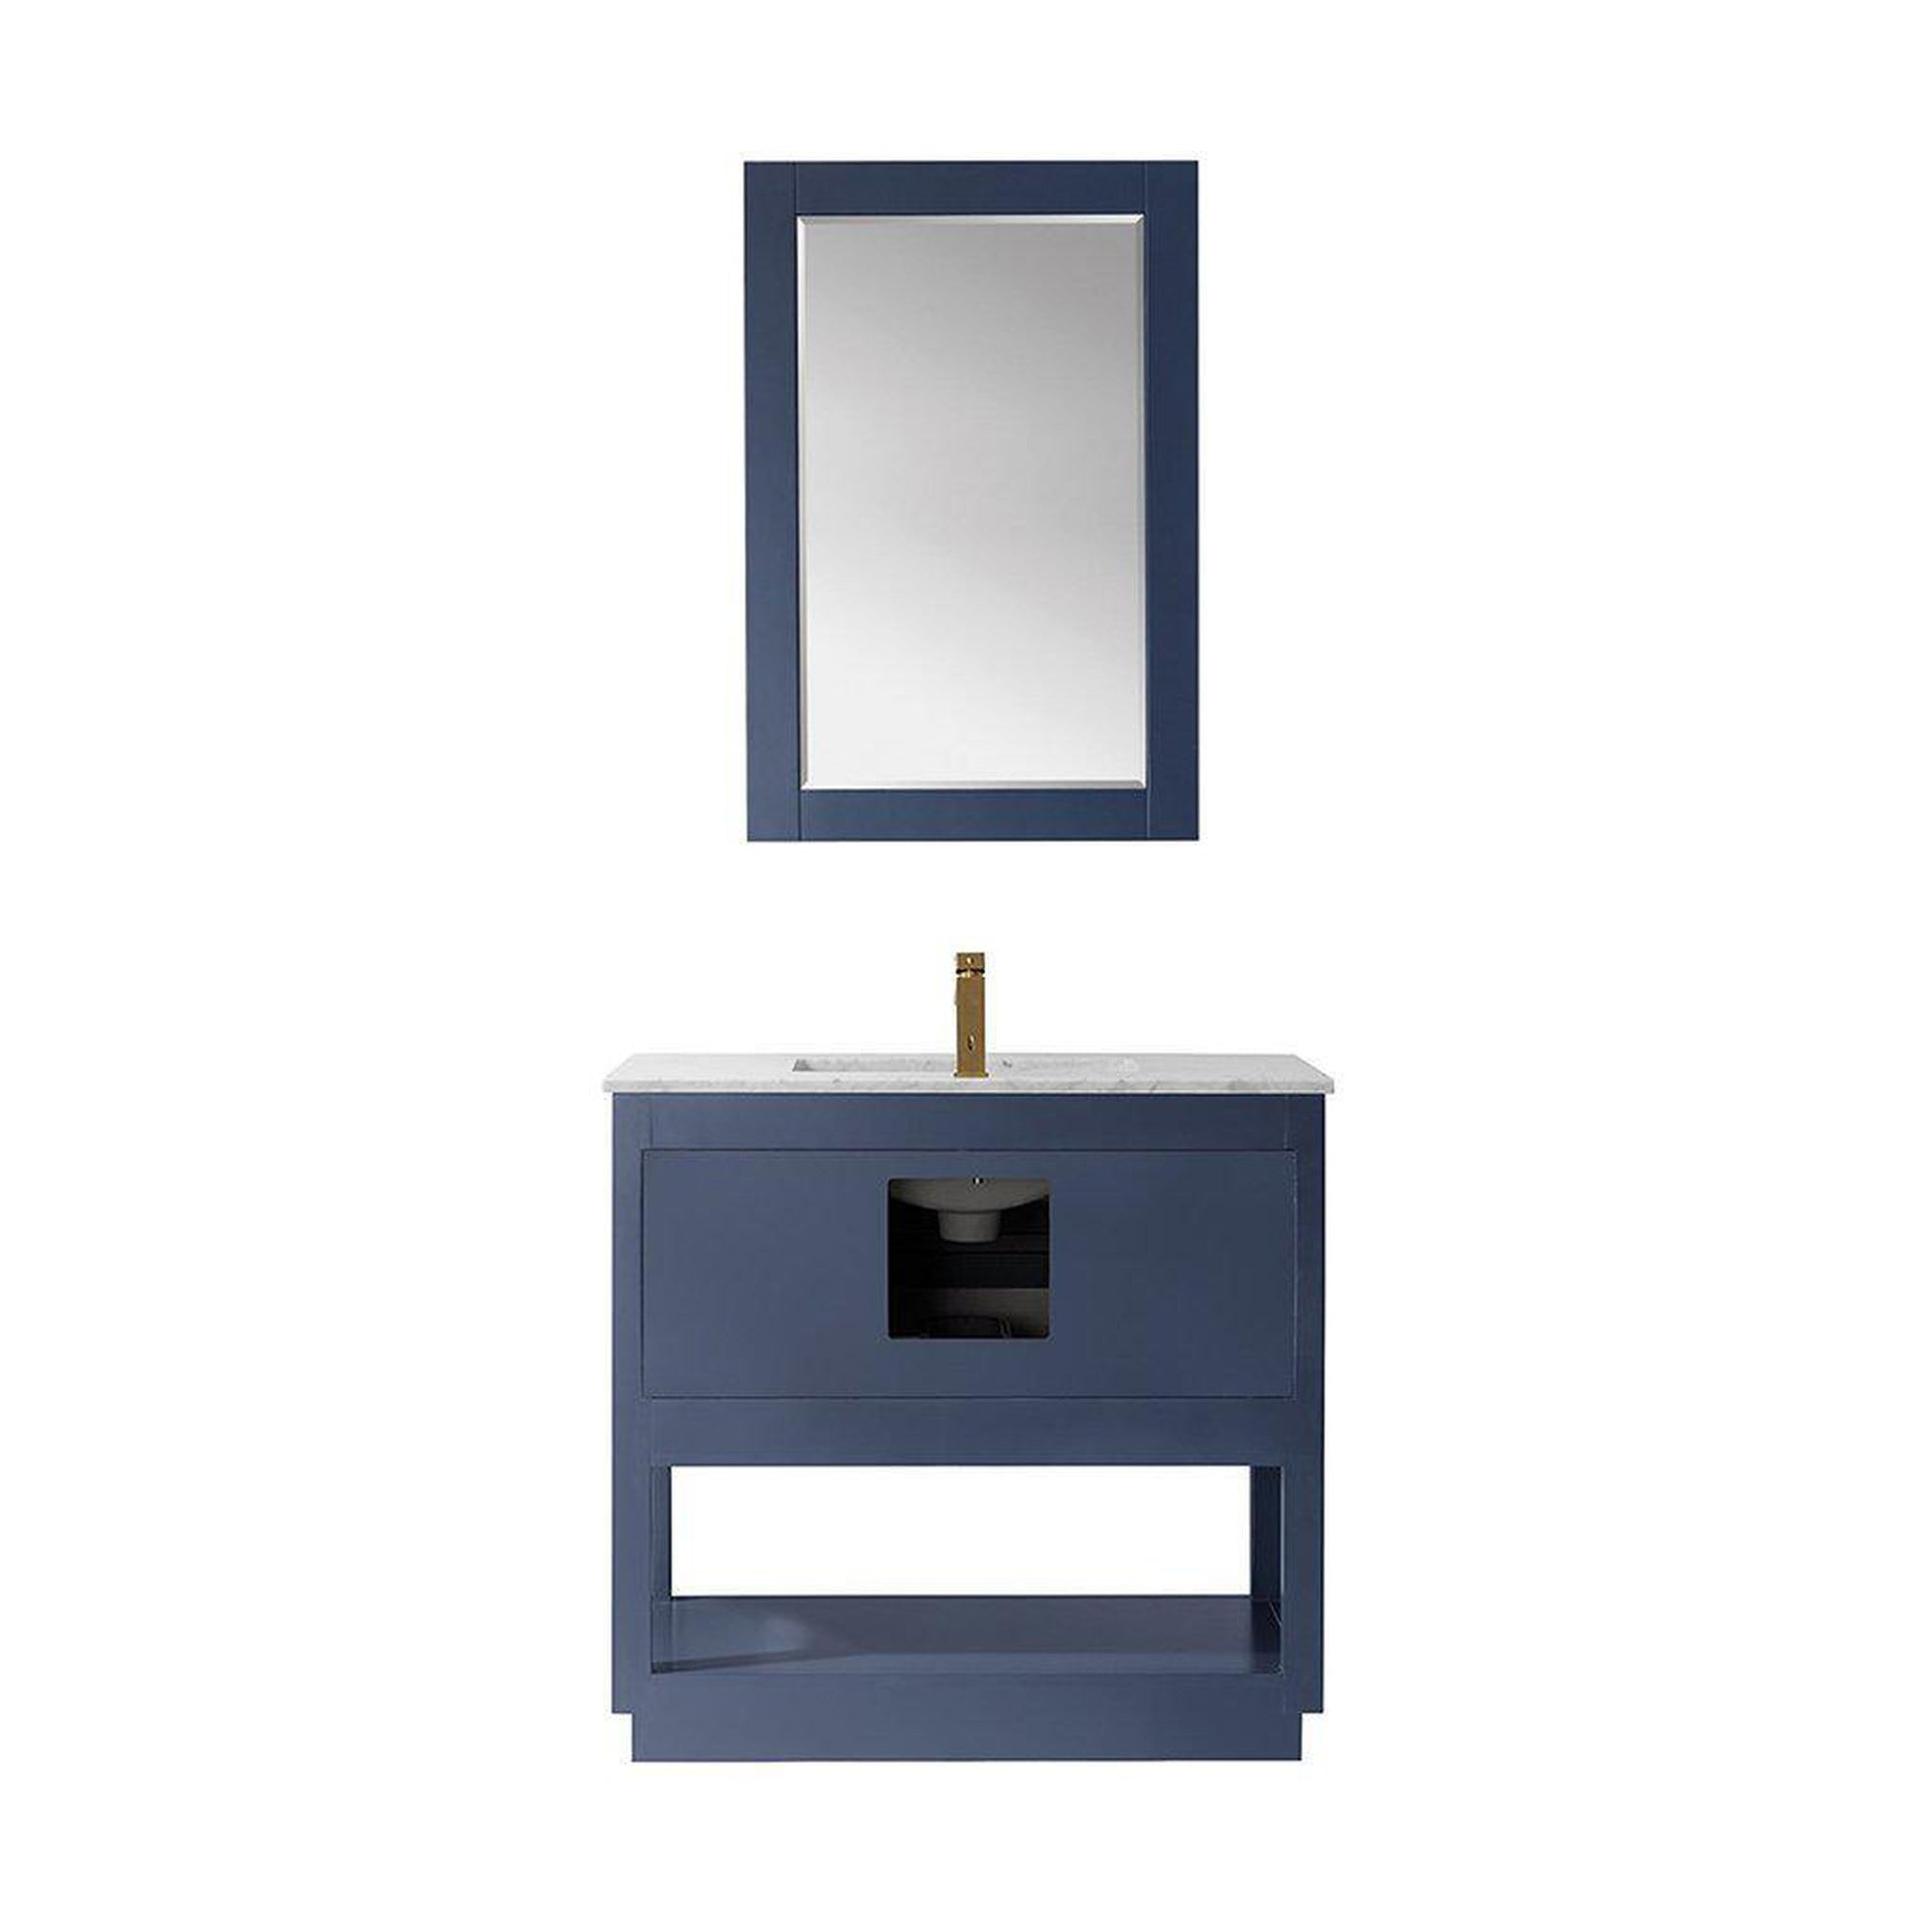 Altair Remi 36" Single Royal Blue Freestanding Bathroom Vanity Set With Mirror, Natural Carrara White Marble Top, Rectangular Undermount Ceramic Sink, and Overflow